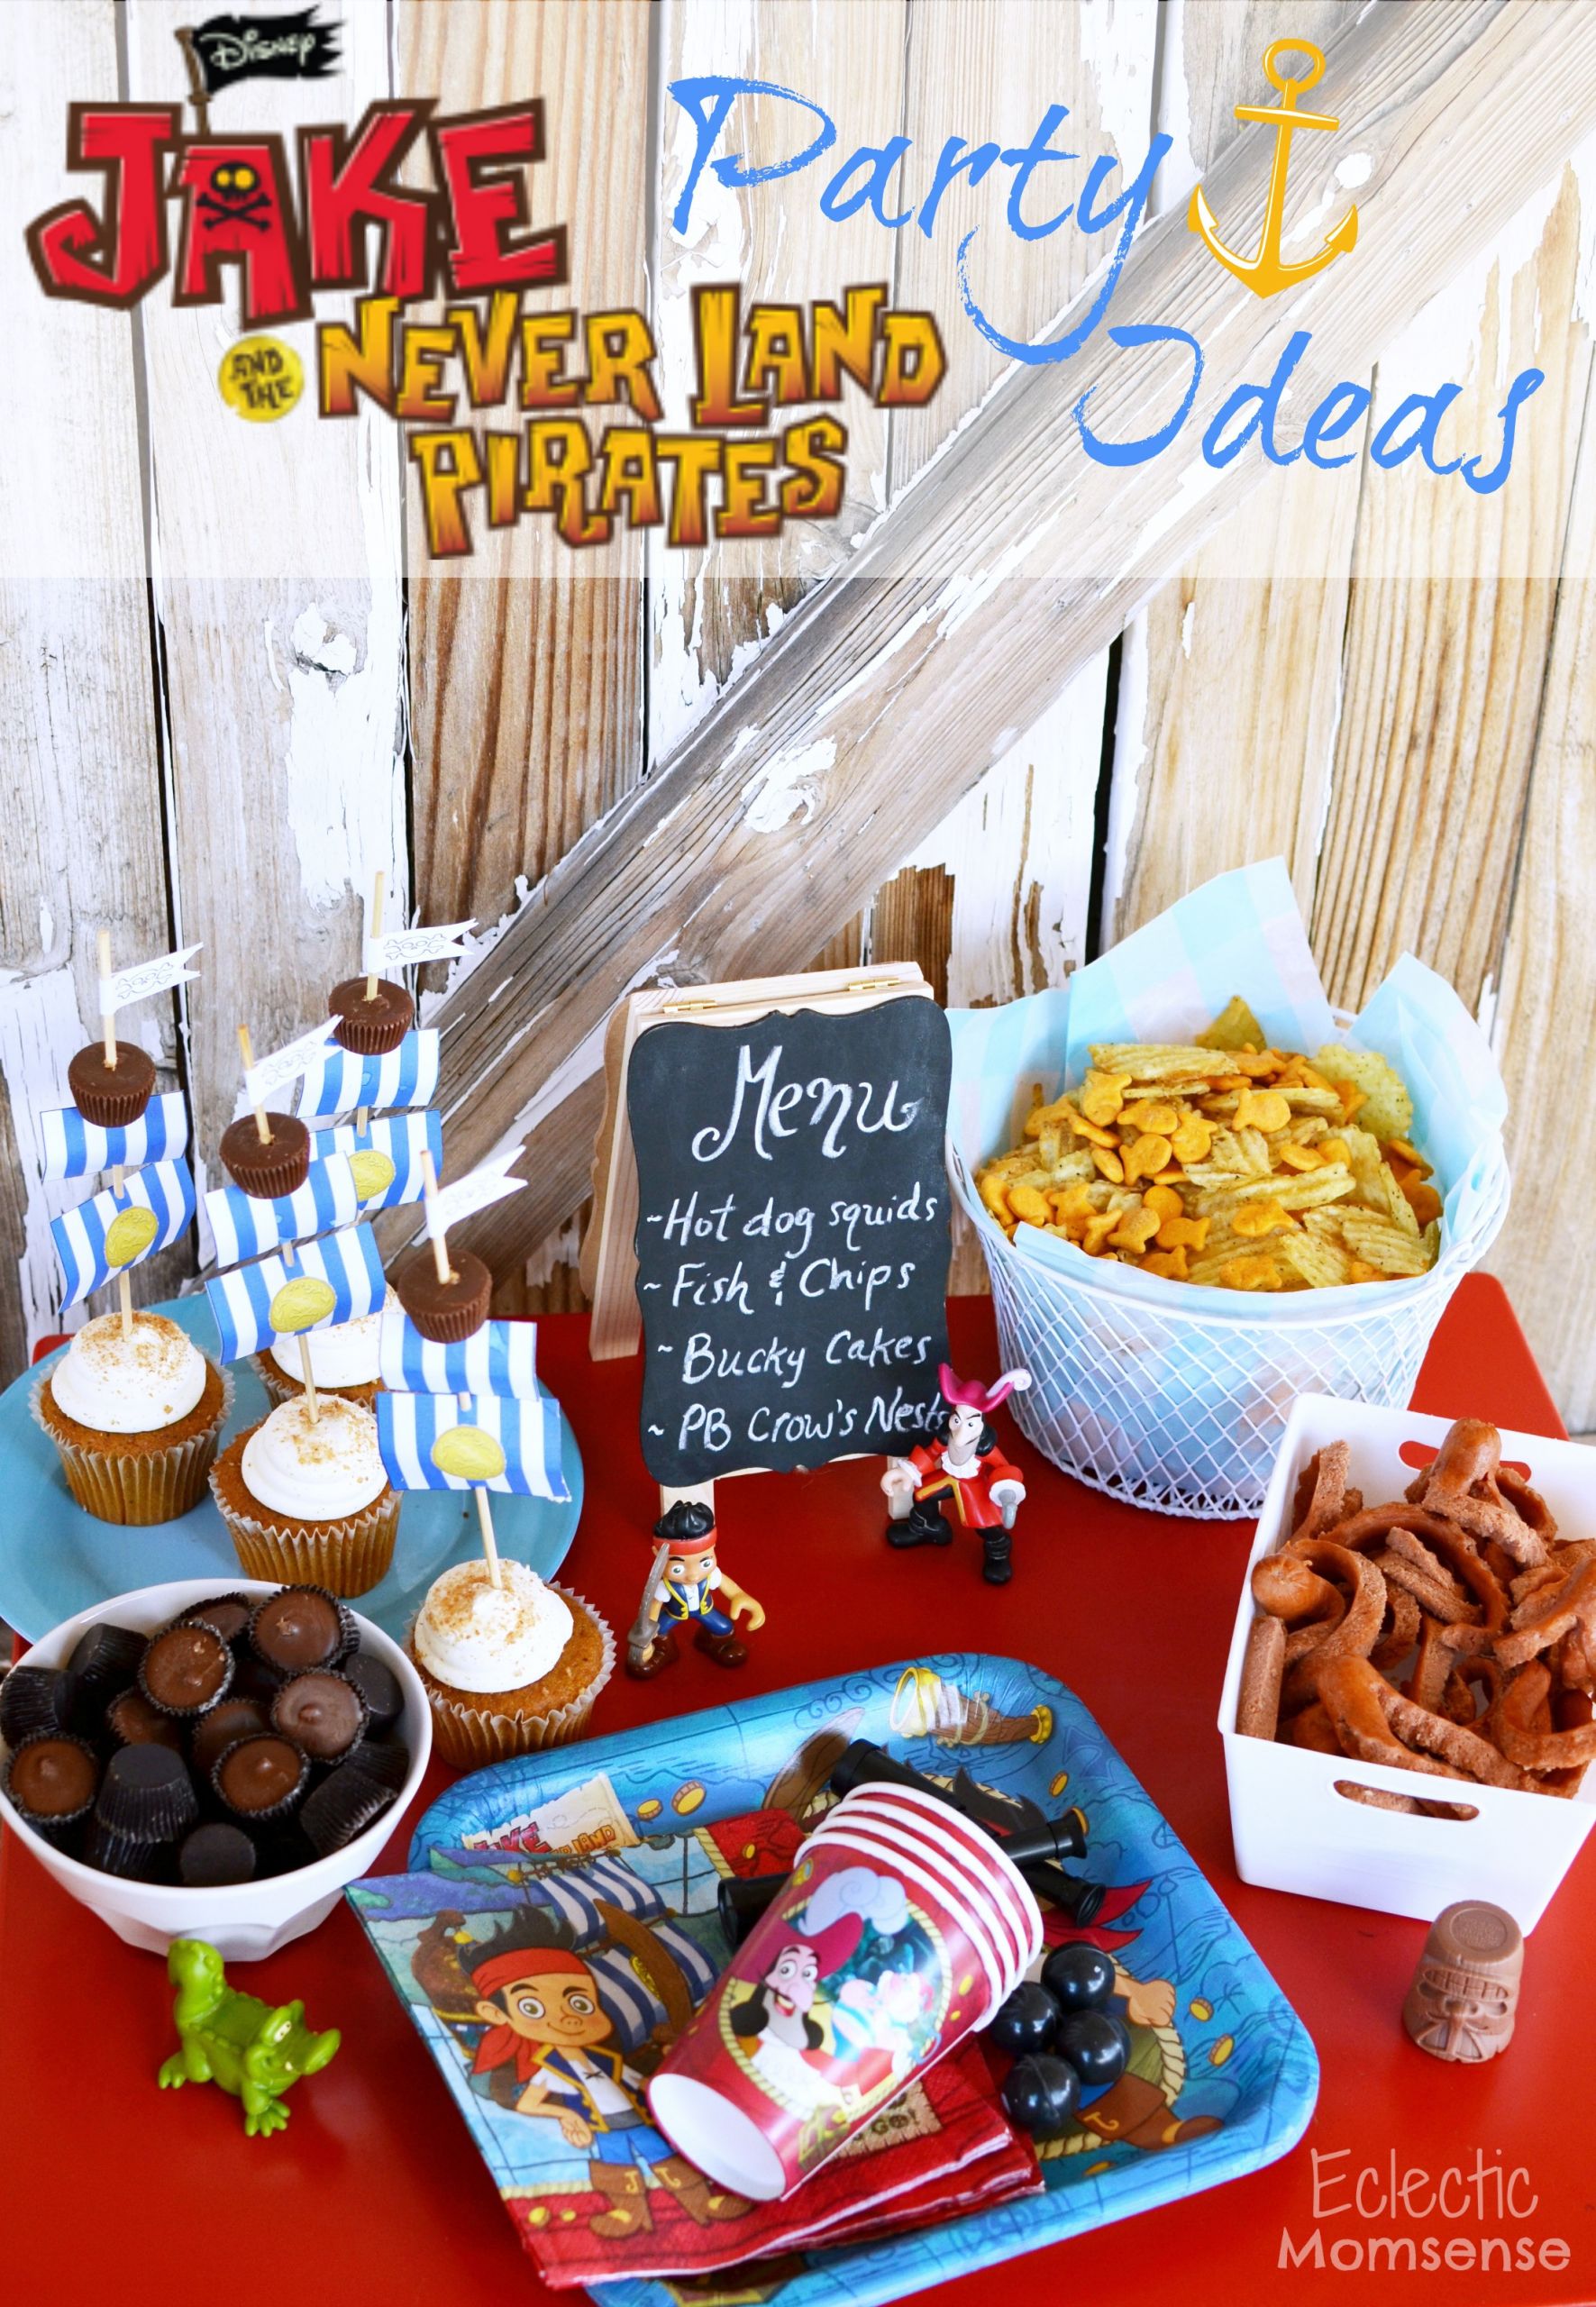 Jake And The Neverland Pirates Party Food Ideas
 Easy Jake and the Neverland Pirates Party Ideas Eclectic